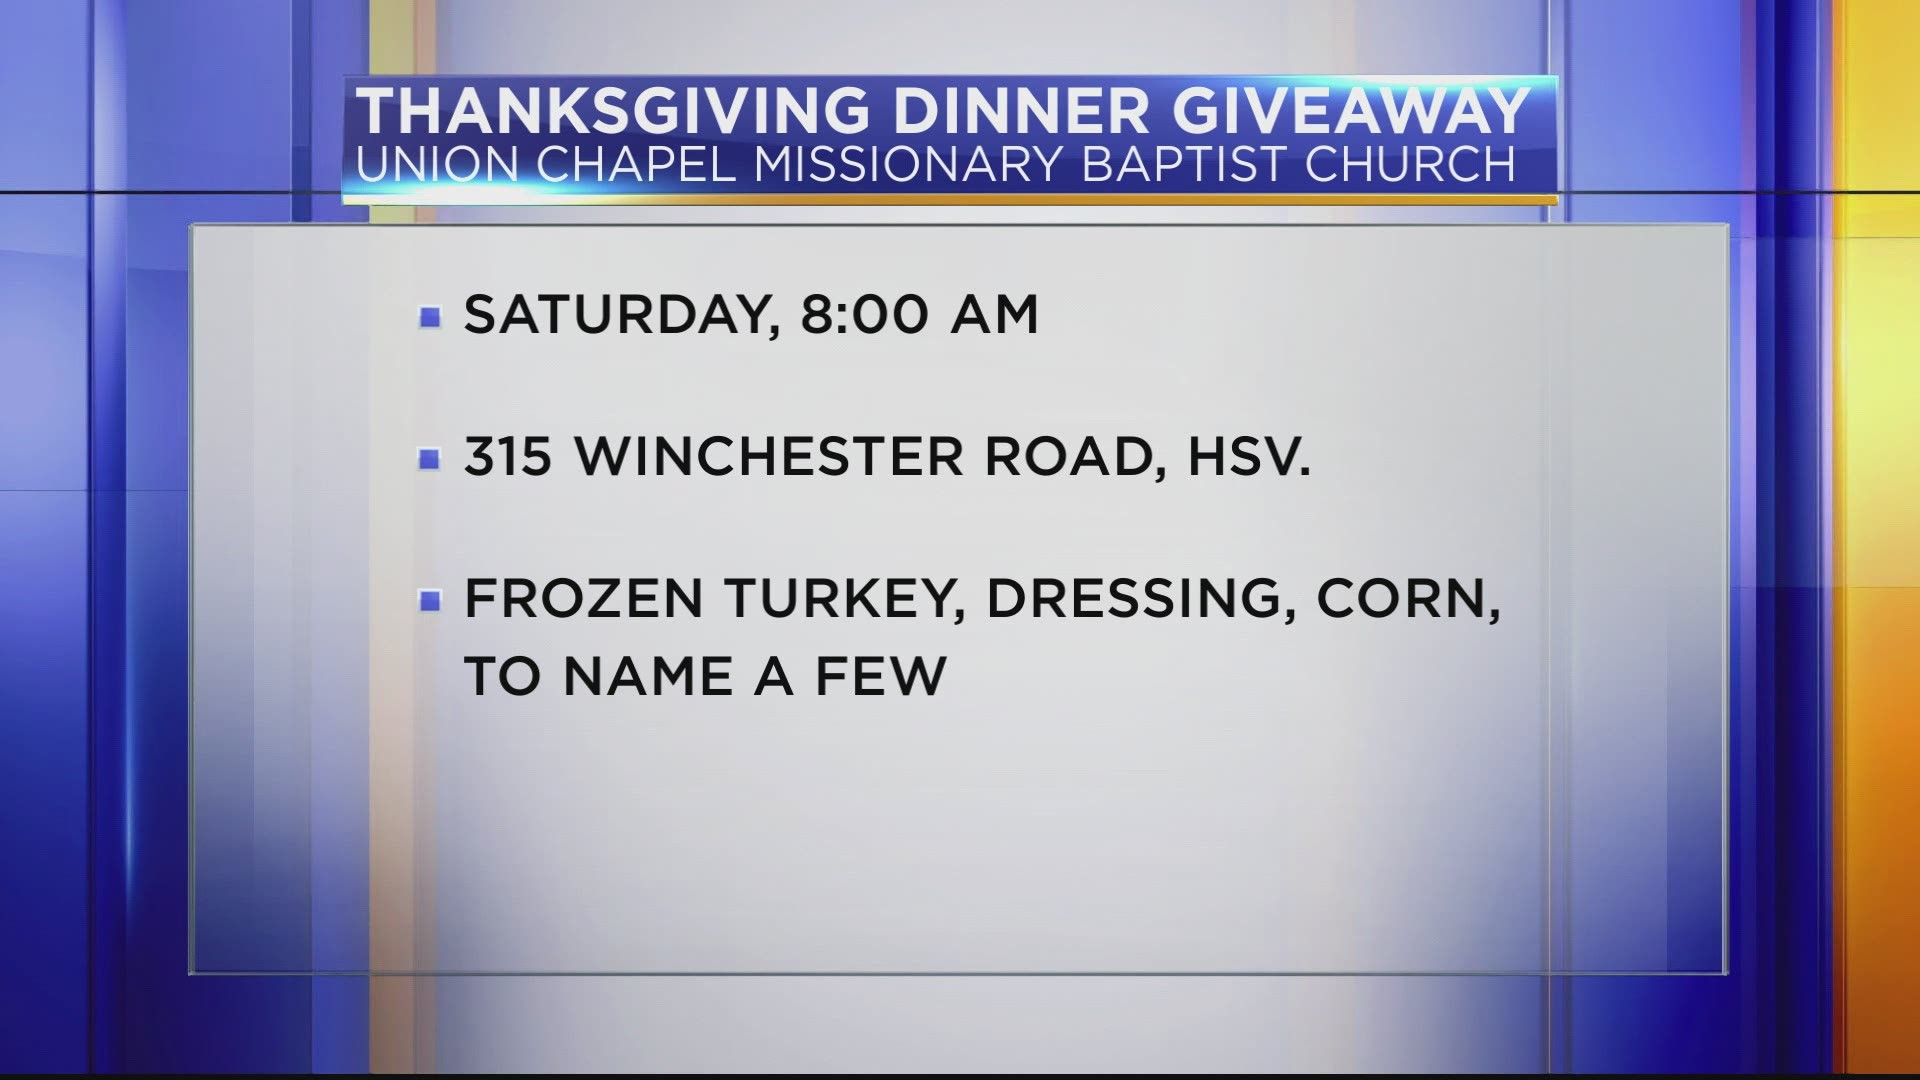 Thanksgiving dinner boxes including a turkey and all the fixins are being given away on Nov. 21.